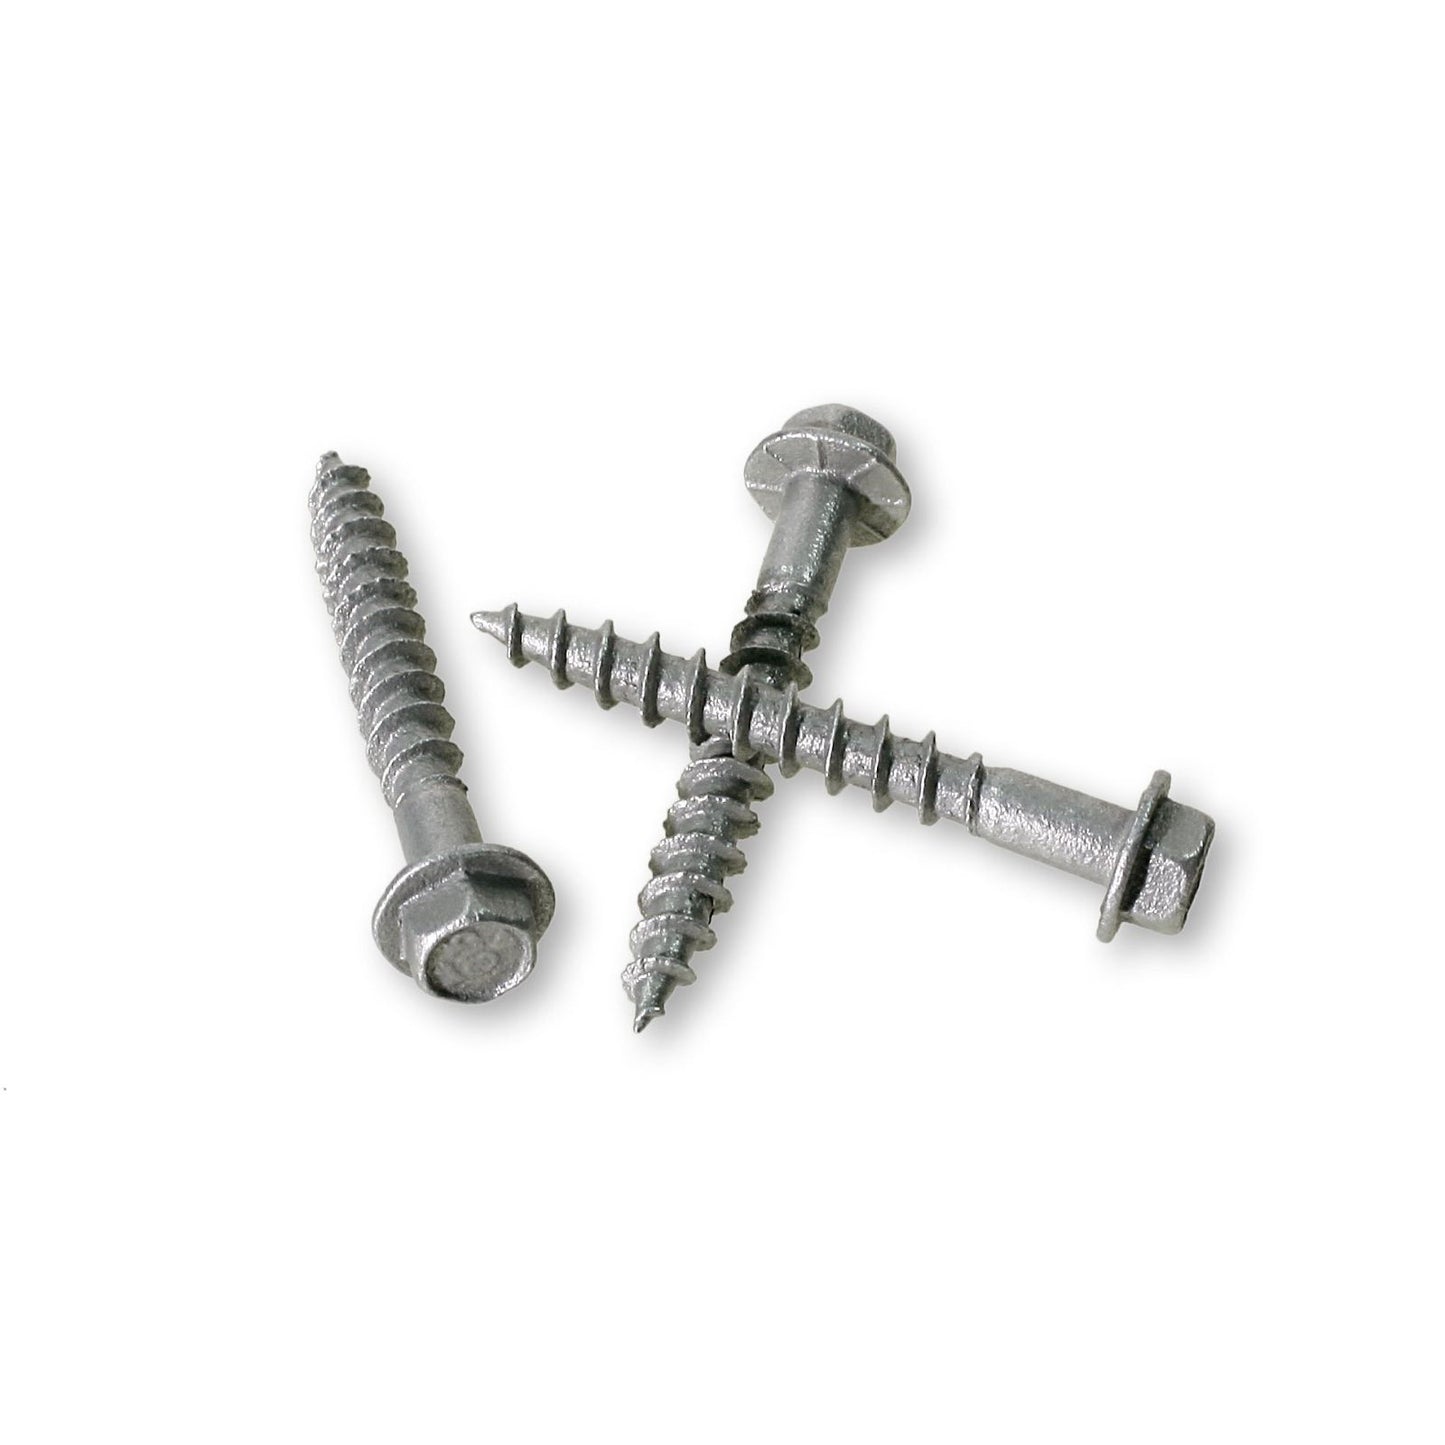 Simpson Strong-Tie #10 x 1-1/2 in. 1/4-Hex Drive, Strong-Drive SD Connector  Screw (100-Pack) SD10112R100 - The Home Depot